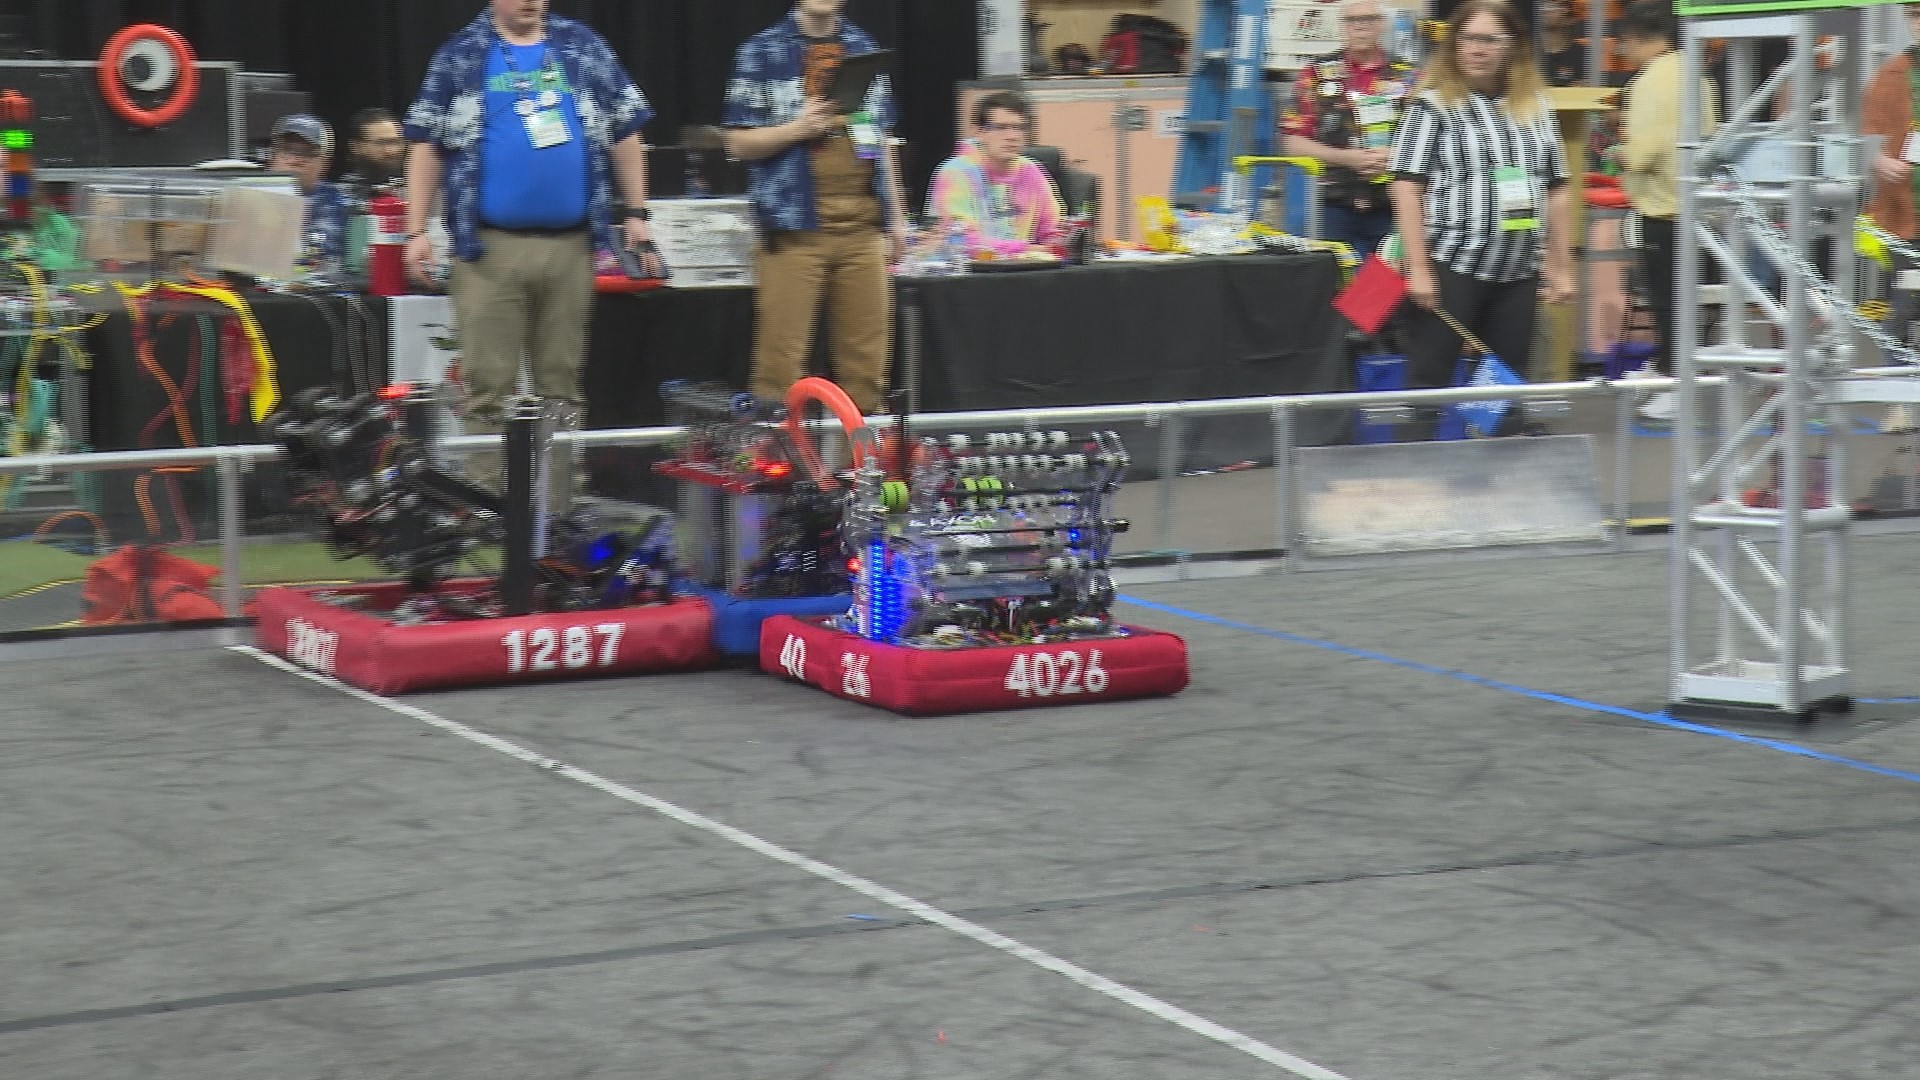 GeorgiaFirst Robotics is a STEM-based organization for youth across the state.